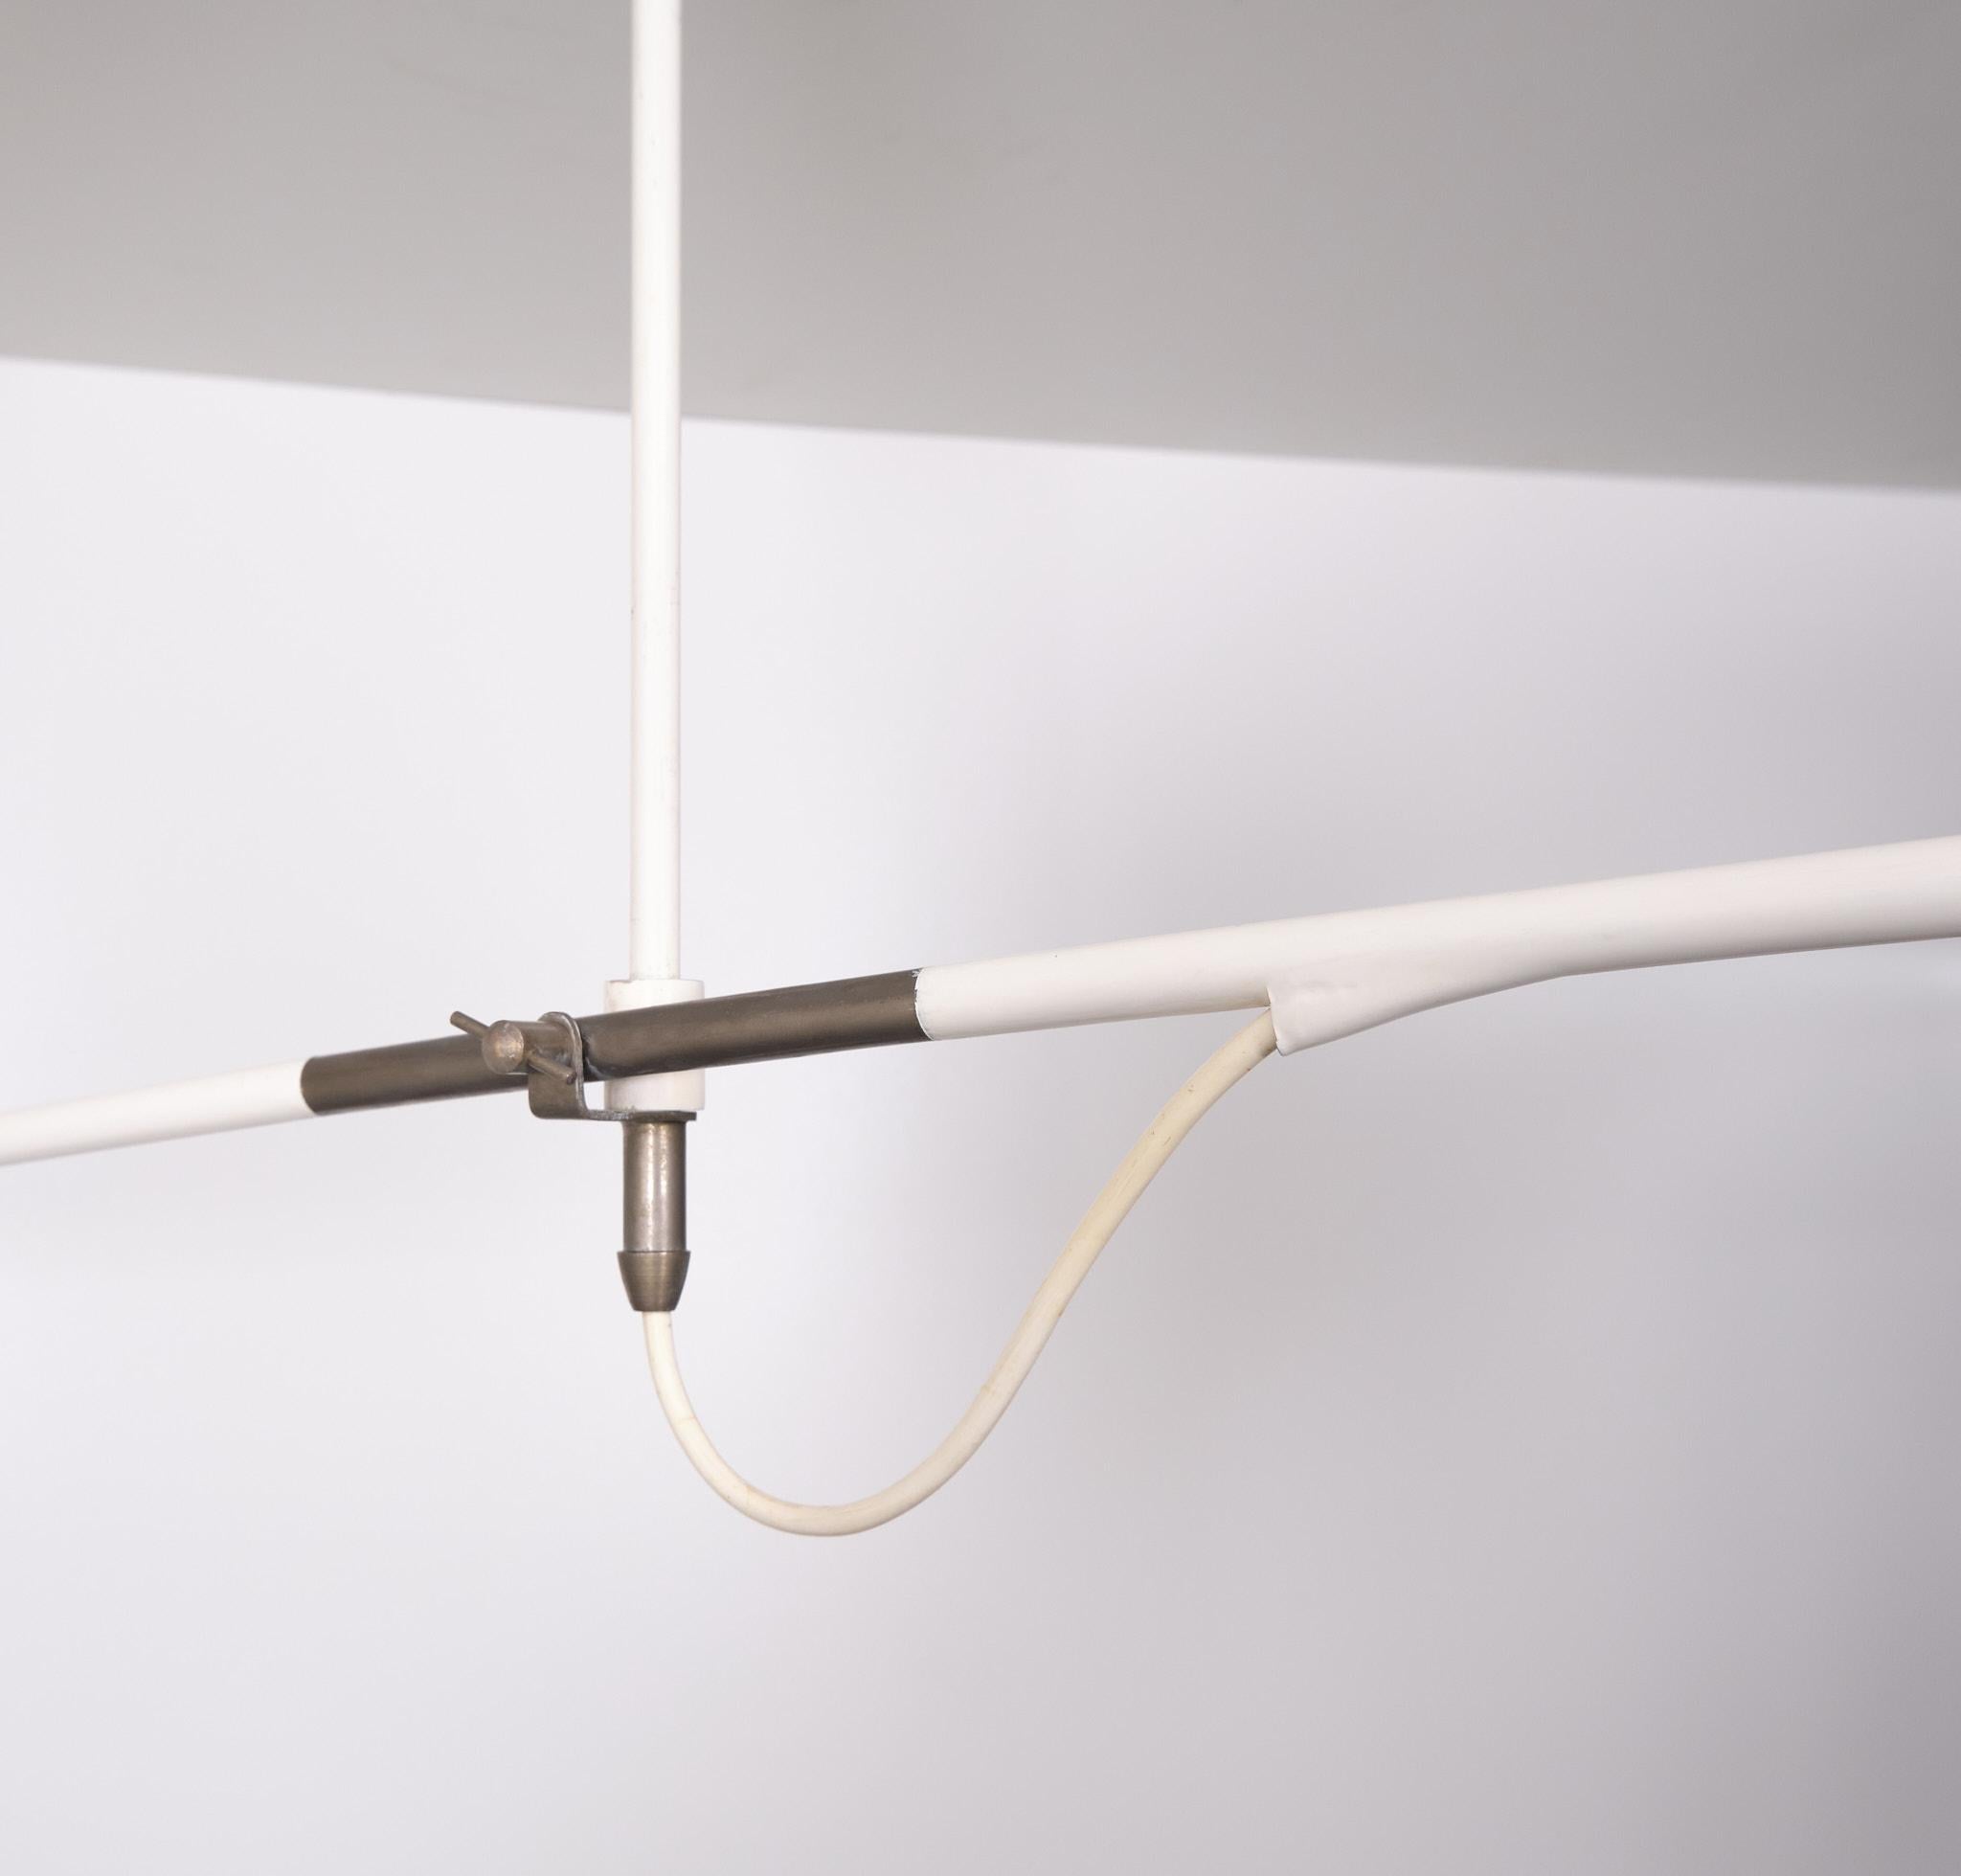 Large Anvia counter balance ceiling lamp one off the nicest lamps i ever own 
Adjustable in any direction and stays there, because of the counter weight. 
Very good design by J J M Hoogervorst for Anvia Holland 1957. This superb 
Ceiling lamp is